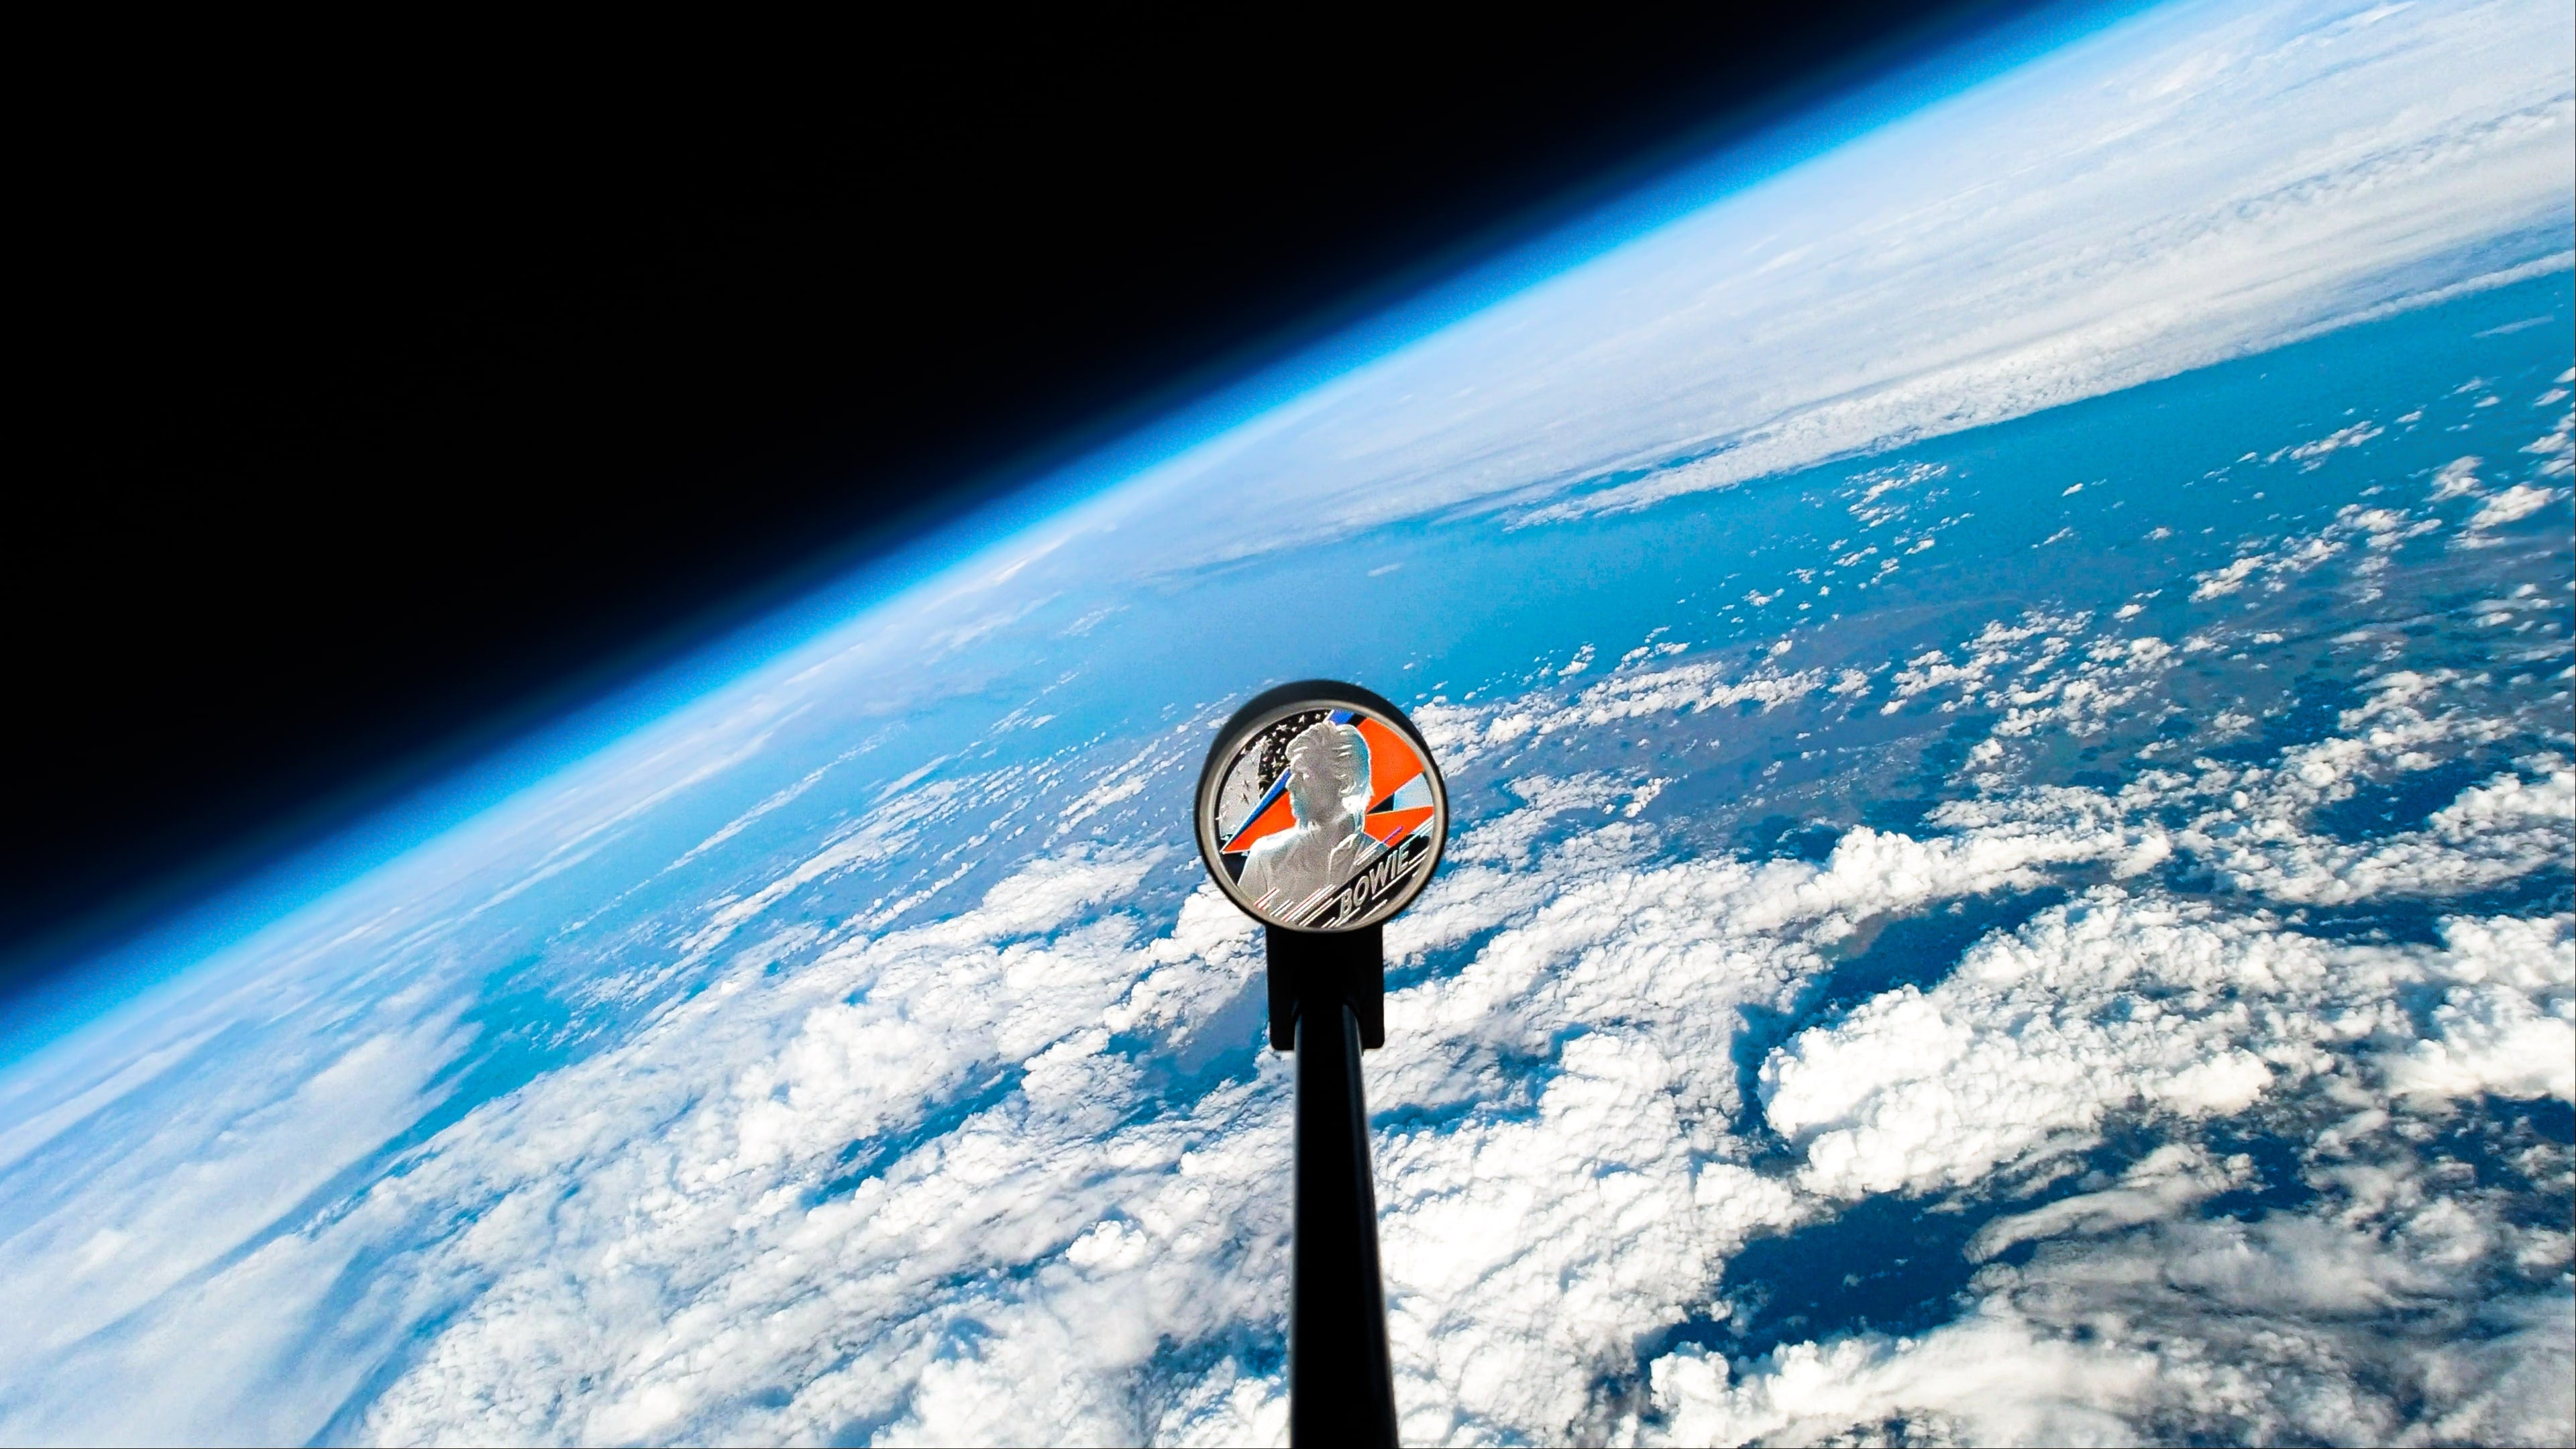 The new David Bowie coin orbiting the Earth’s atmosphere